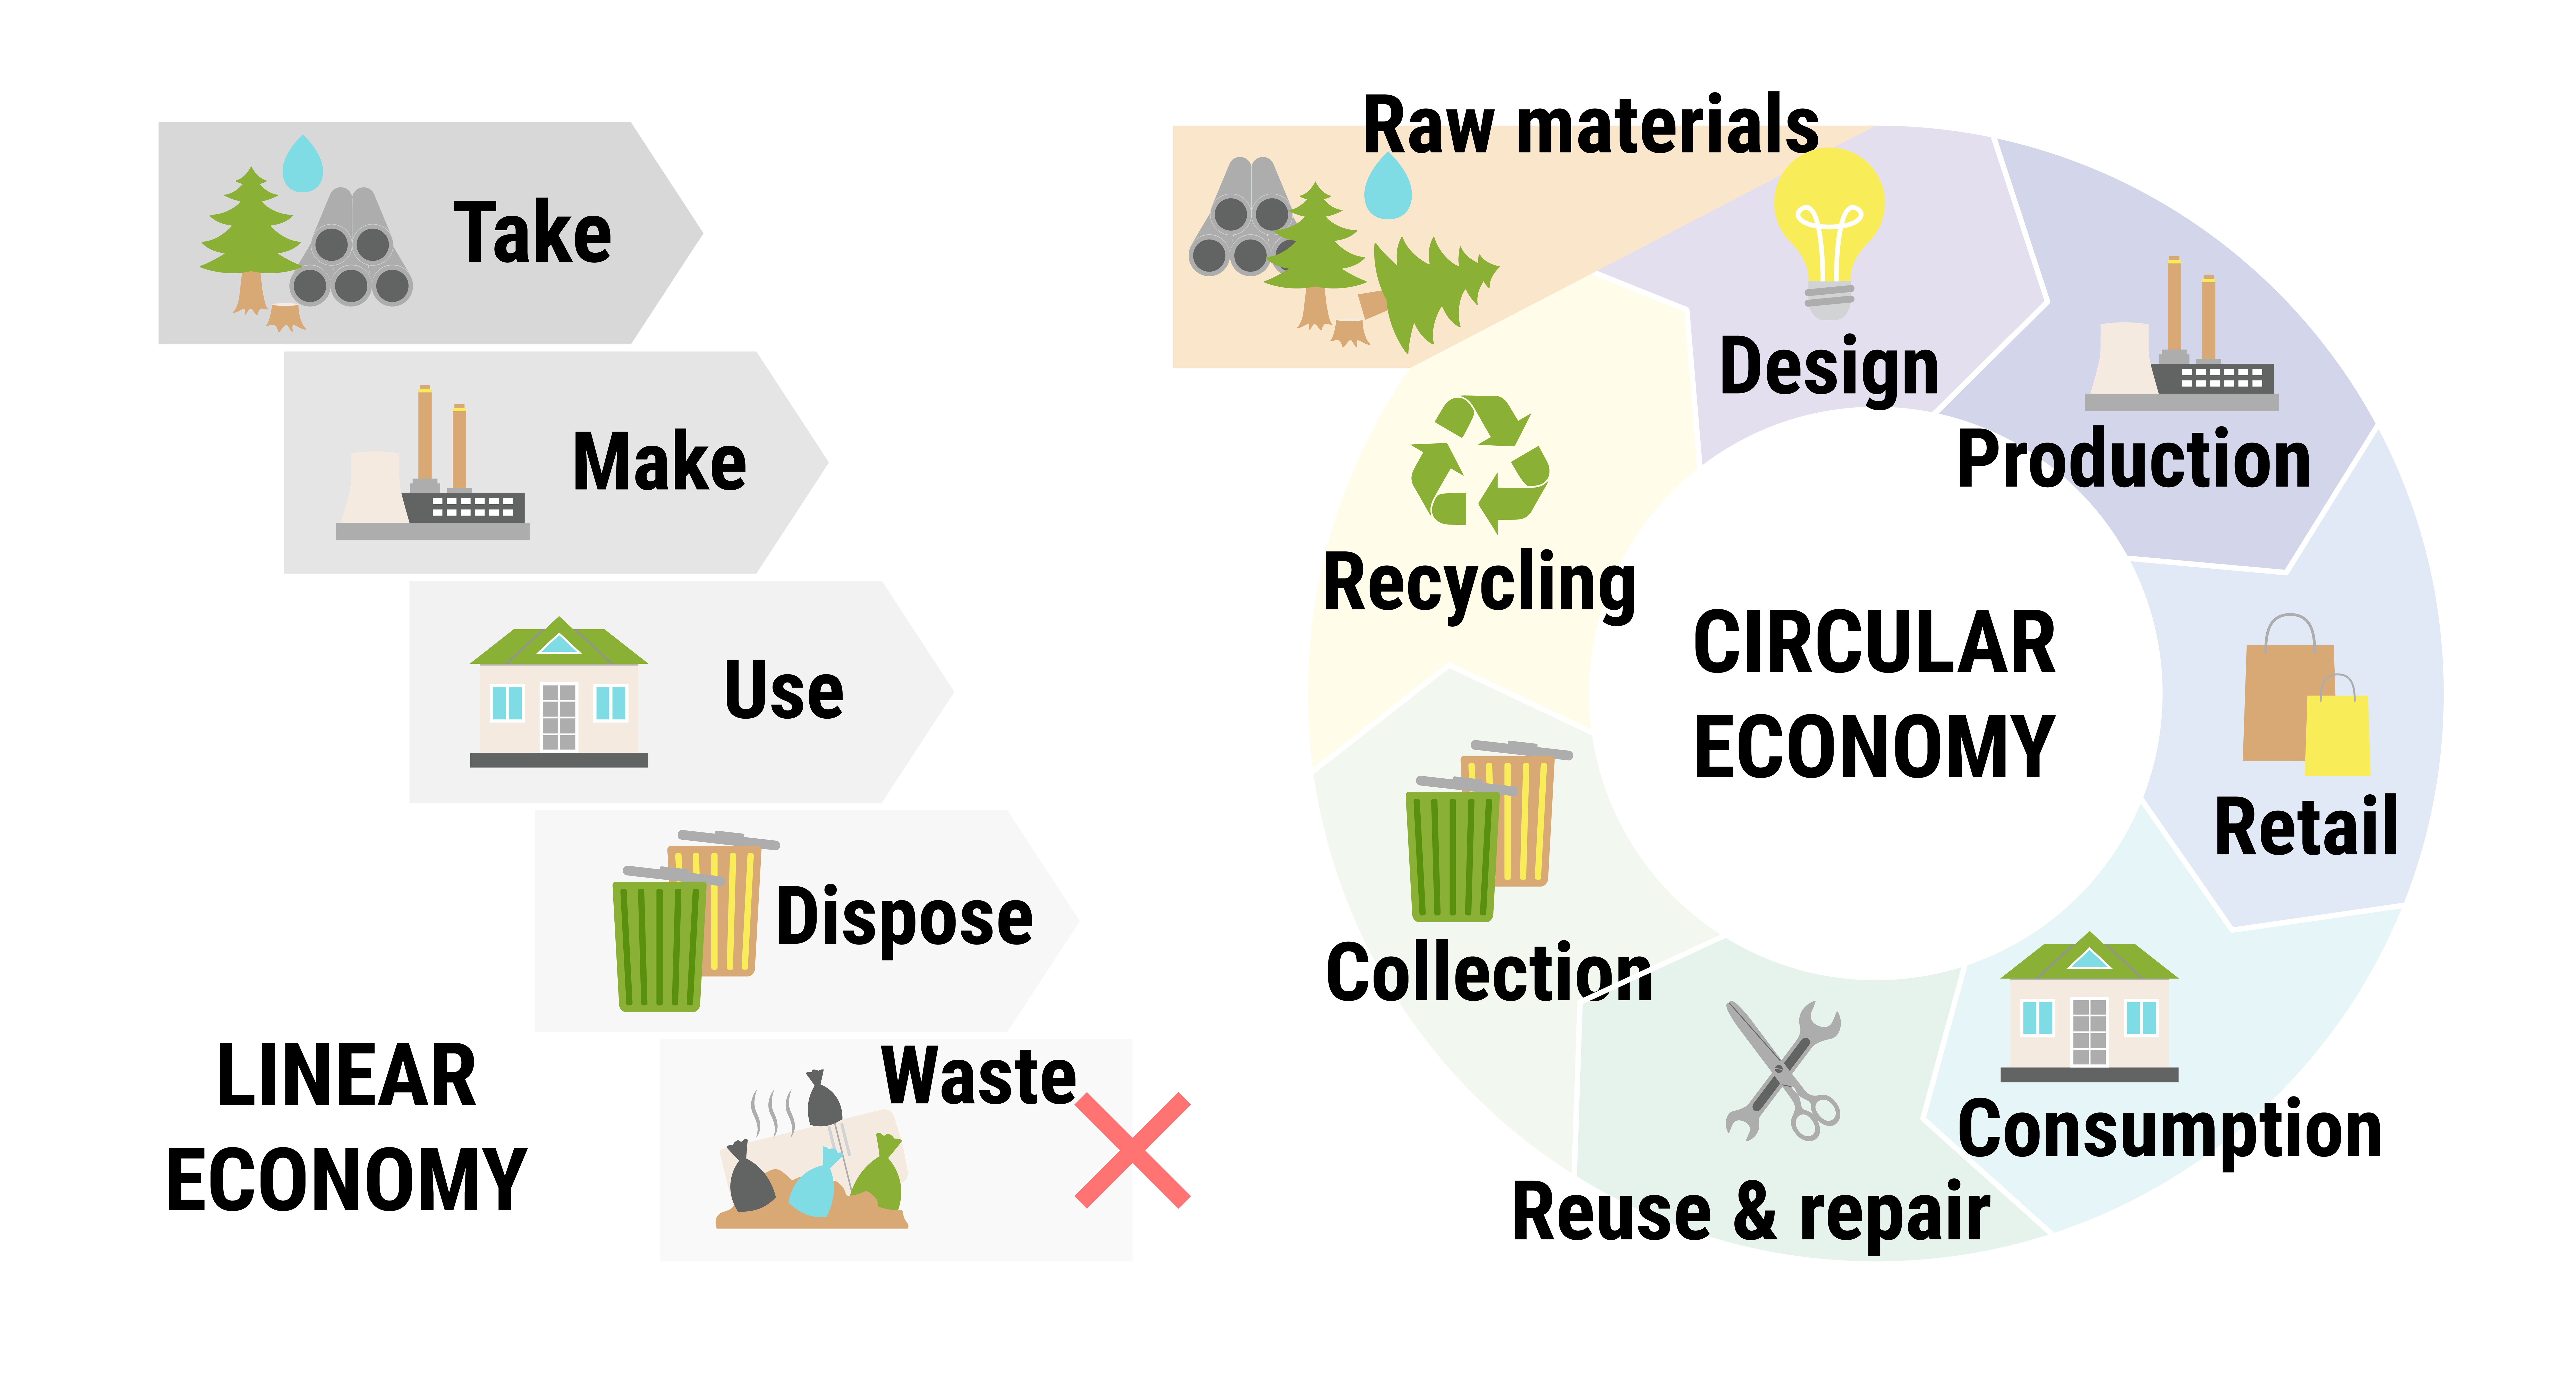 Illustration showing difference between linear economy and circular economy